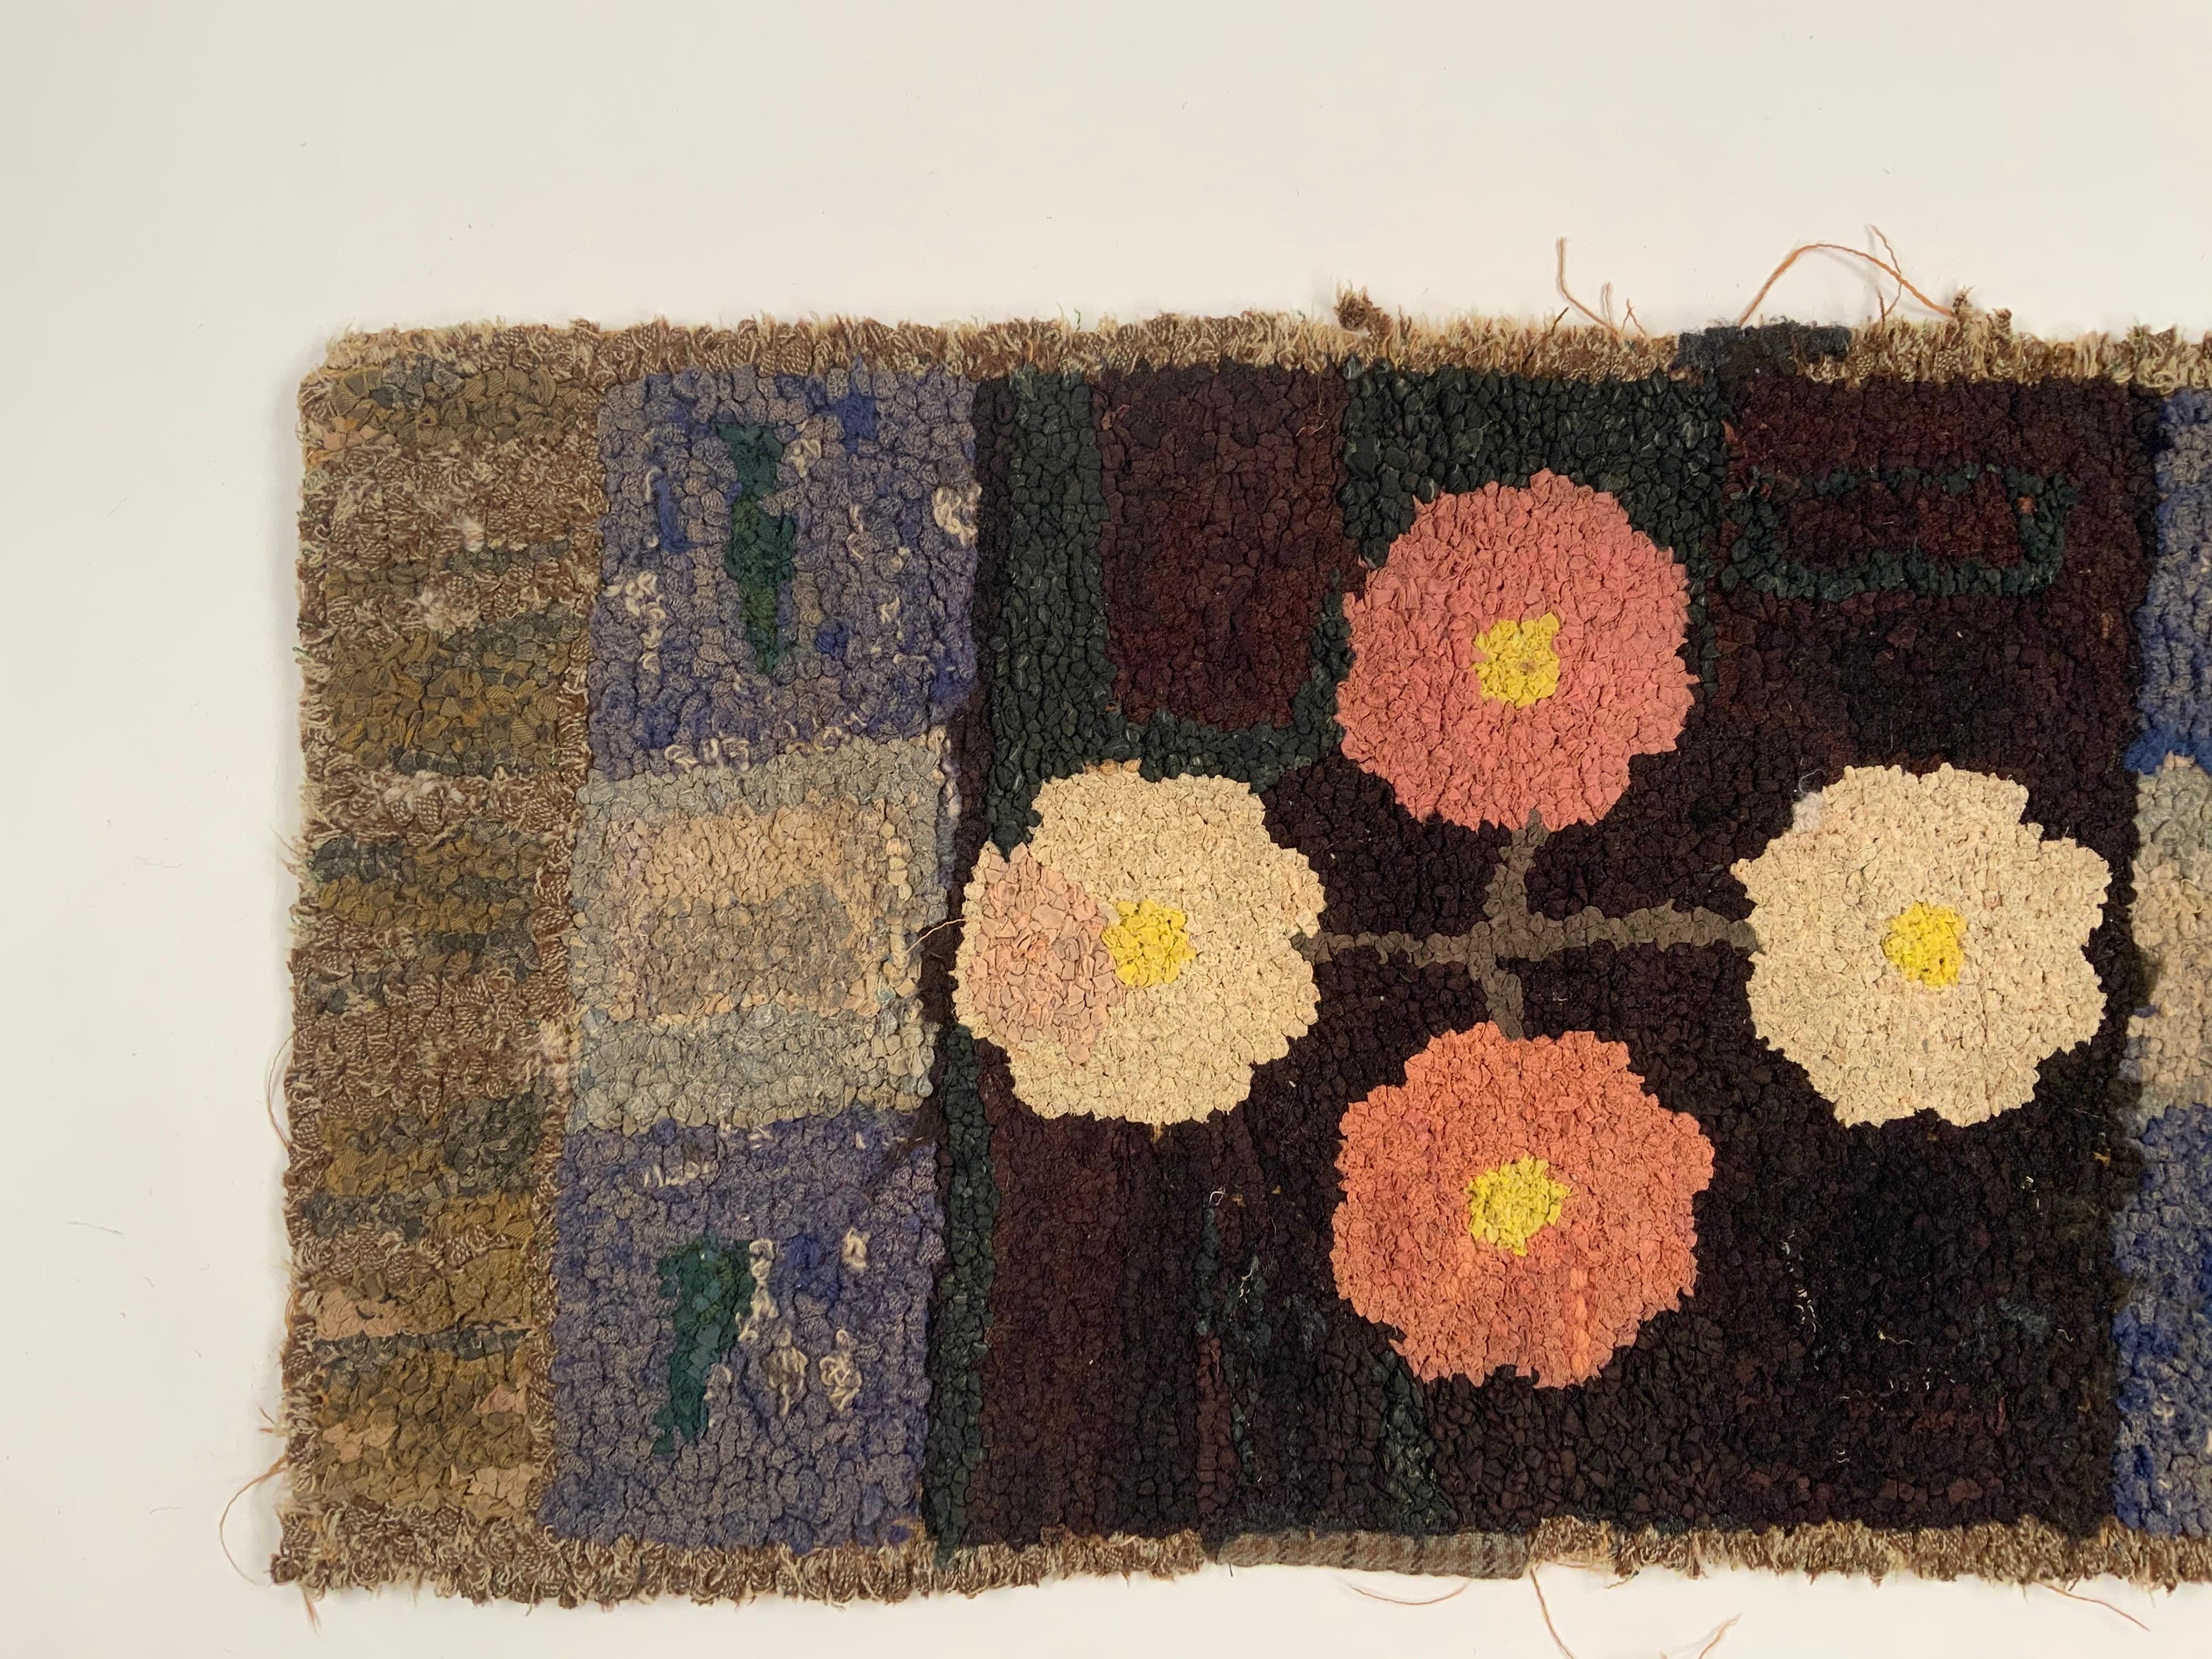 Gorgeous hooked Folk Art rag rug from late 19th/early 20th century. Great colors. Backed in Linen that has deteriorated from age.